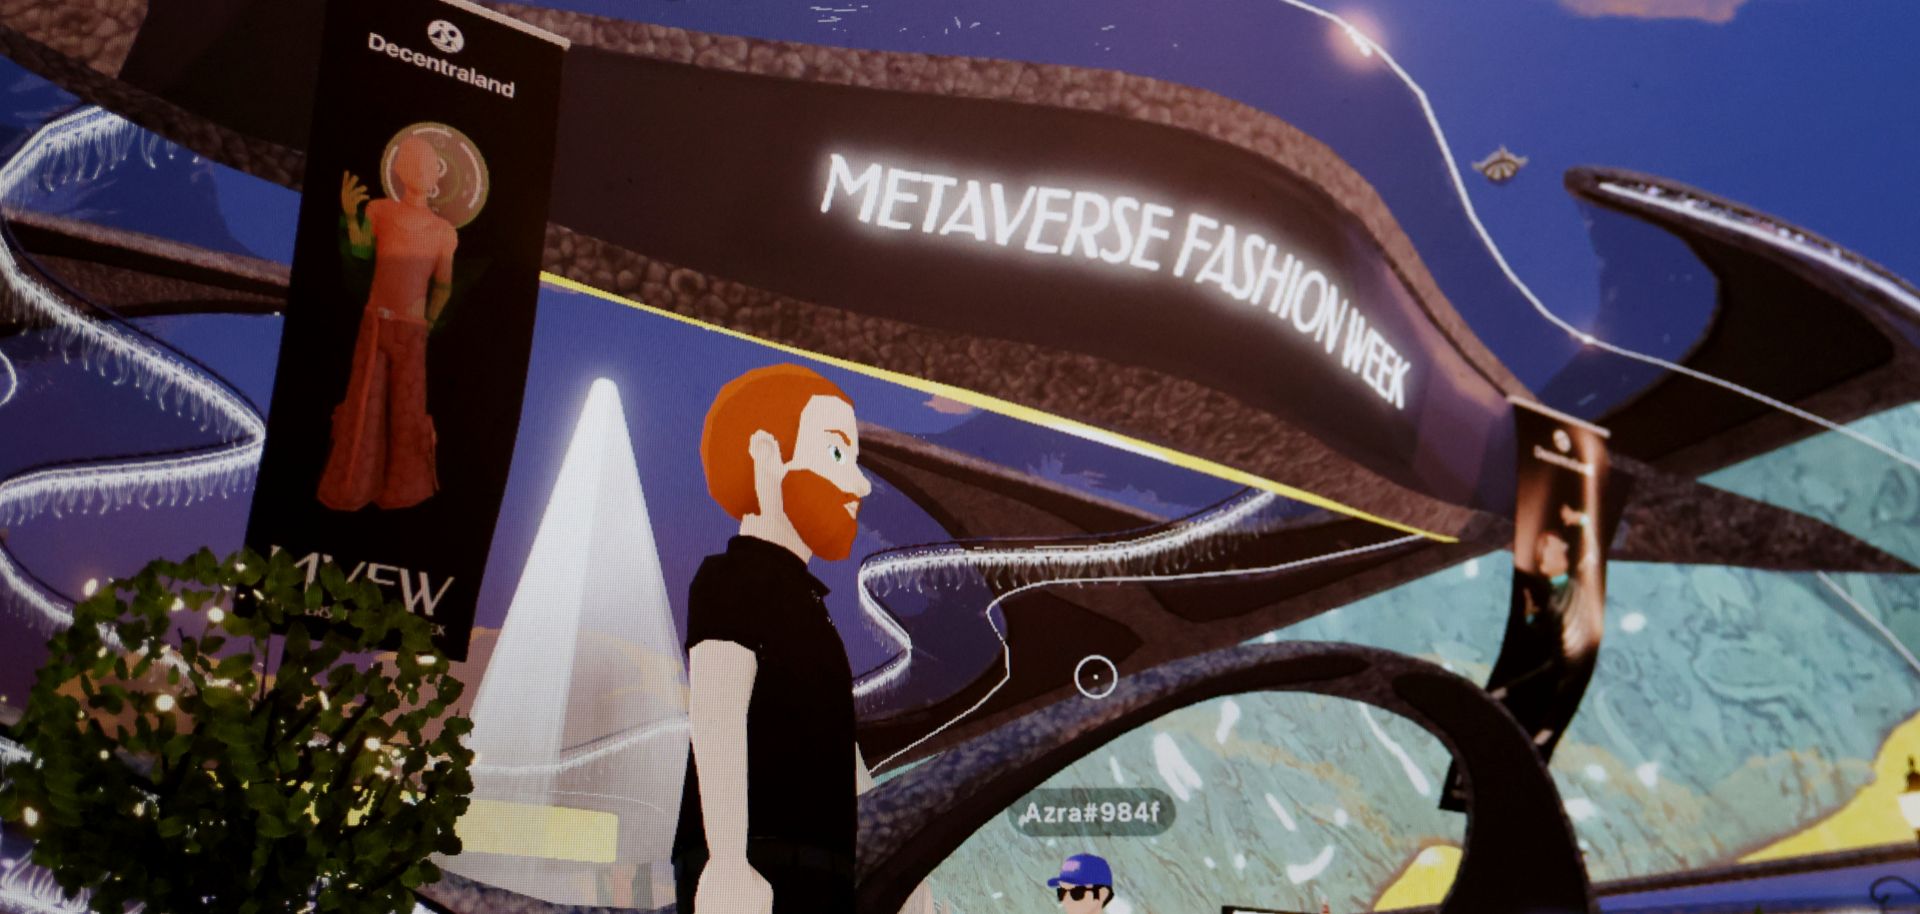 An image taken on March 25, 2022, shows the Metaverse Fashion Week hosted by the virtual world Decentraland. 